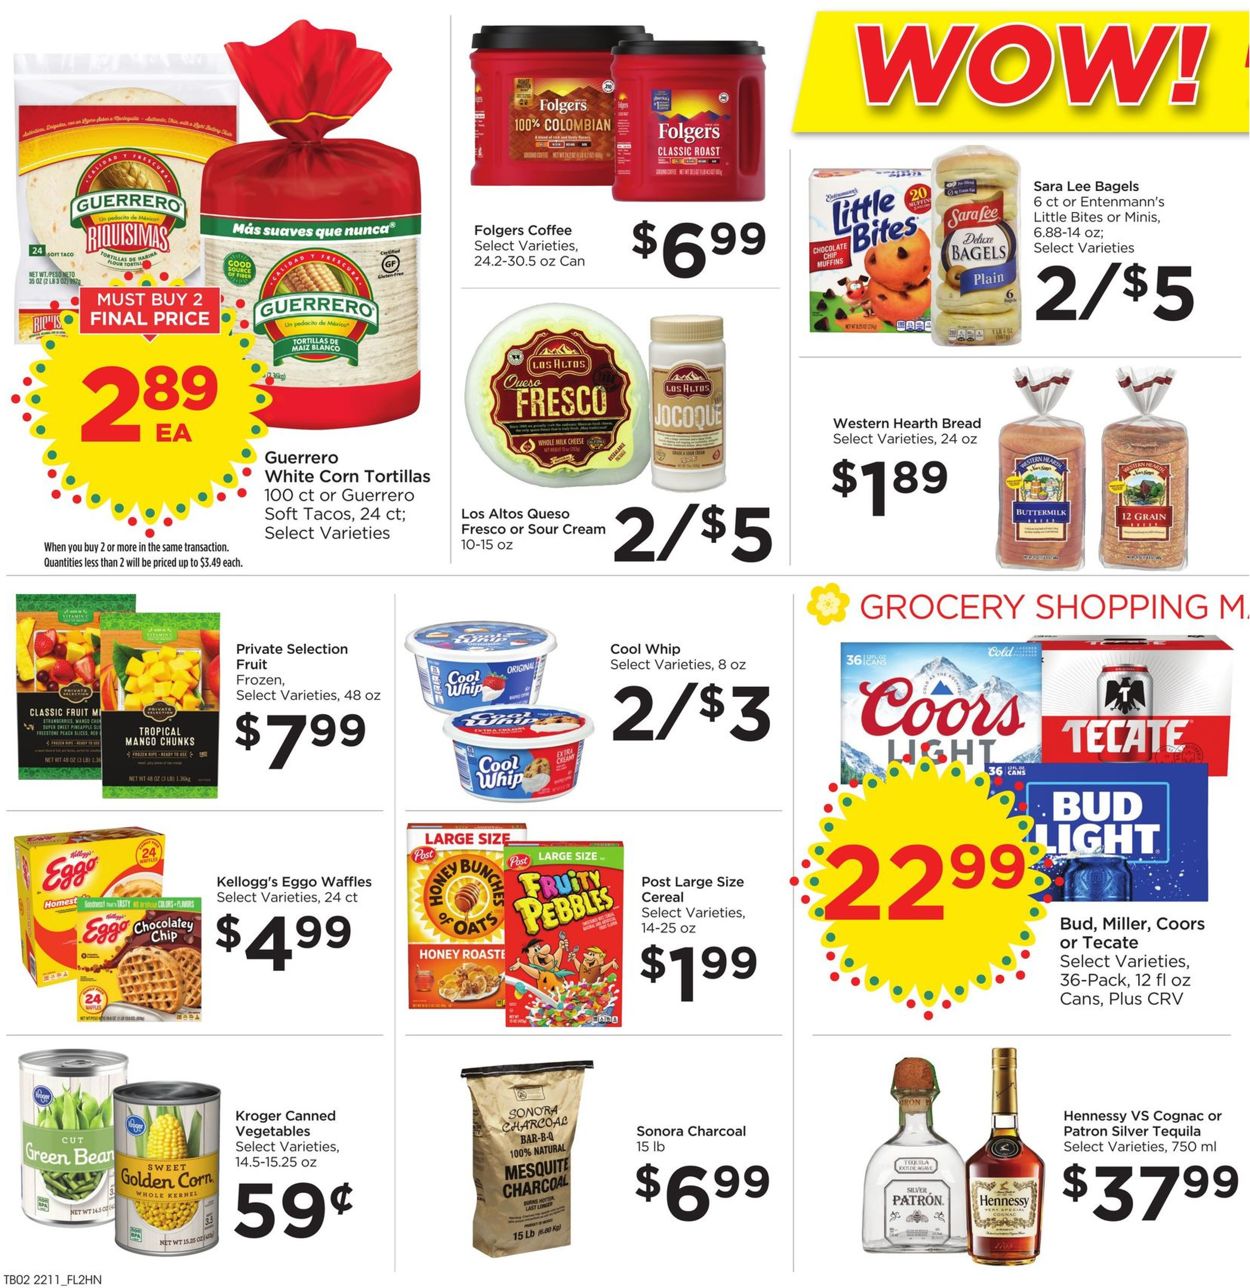 Foods Co. EASTER AD 2022 Weekly Ad Circular - valid 04/13-04/19/2022 (Page 2)